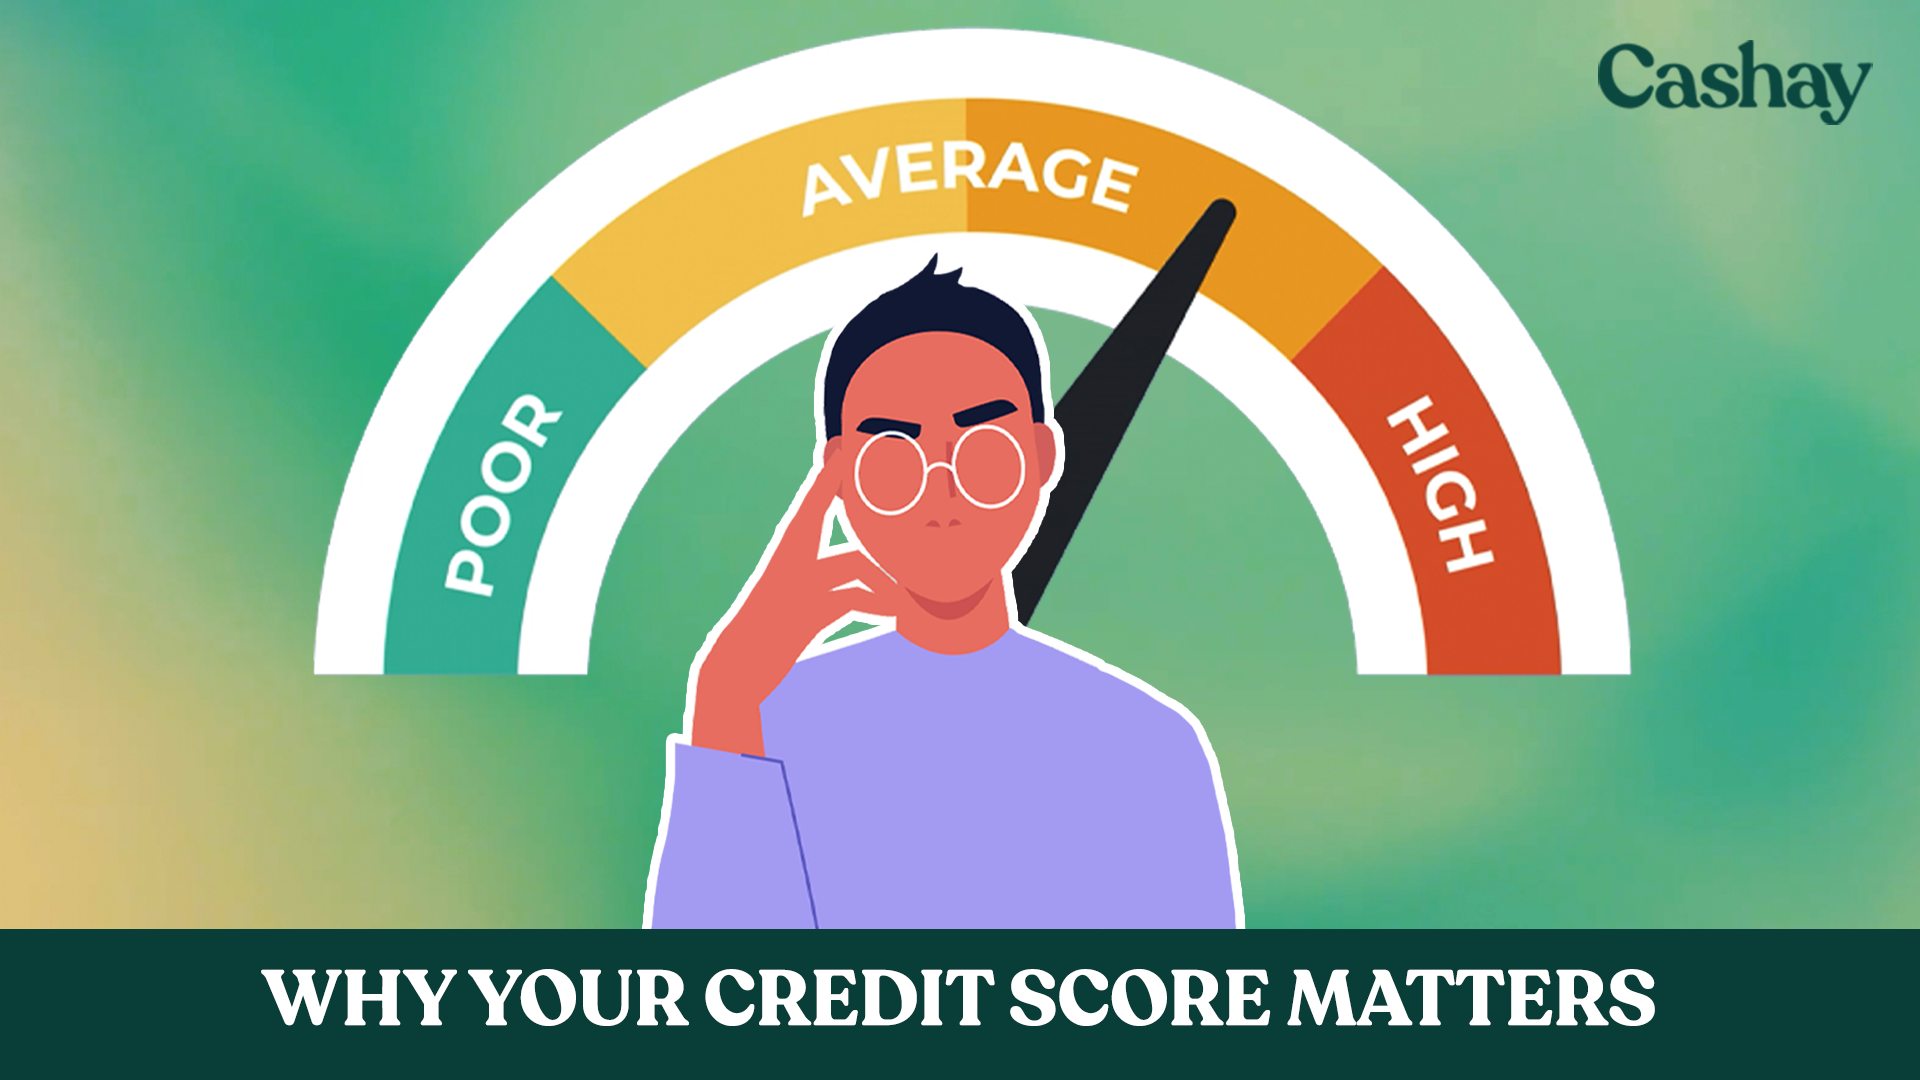 Credit score ranges: Heres what you should know